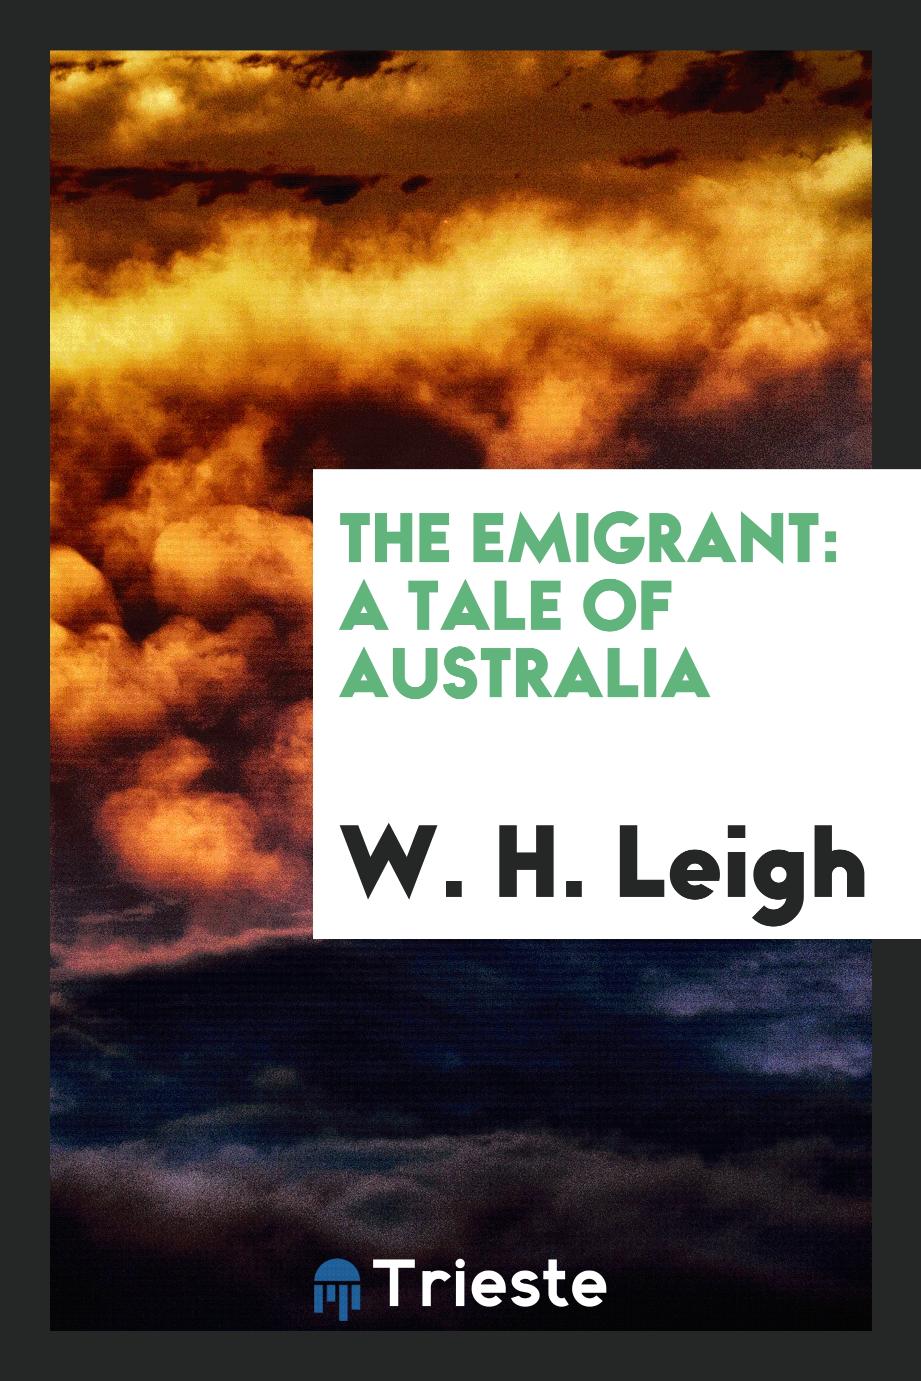 W. H. Leigh - The Emigrant: A Tale of Australia